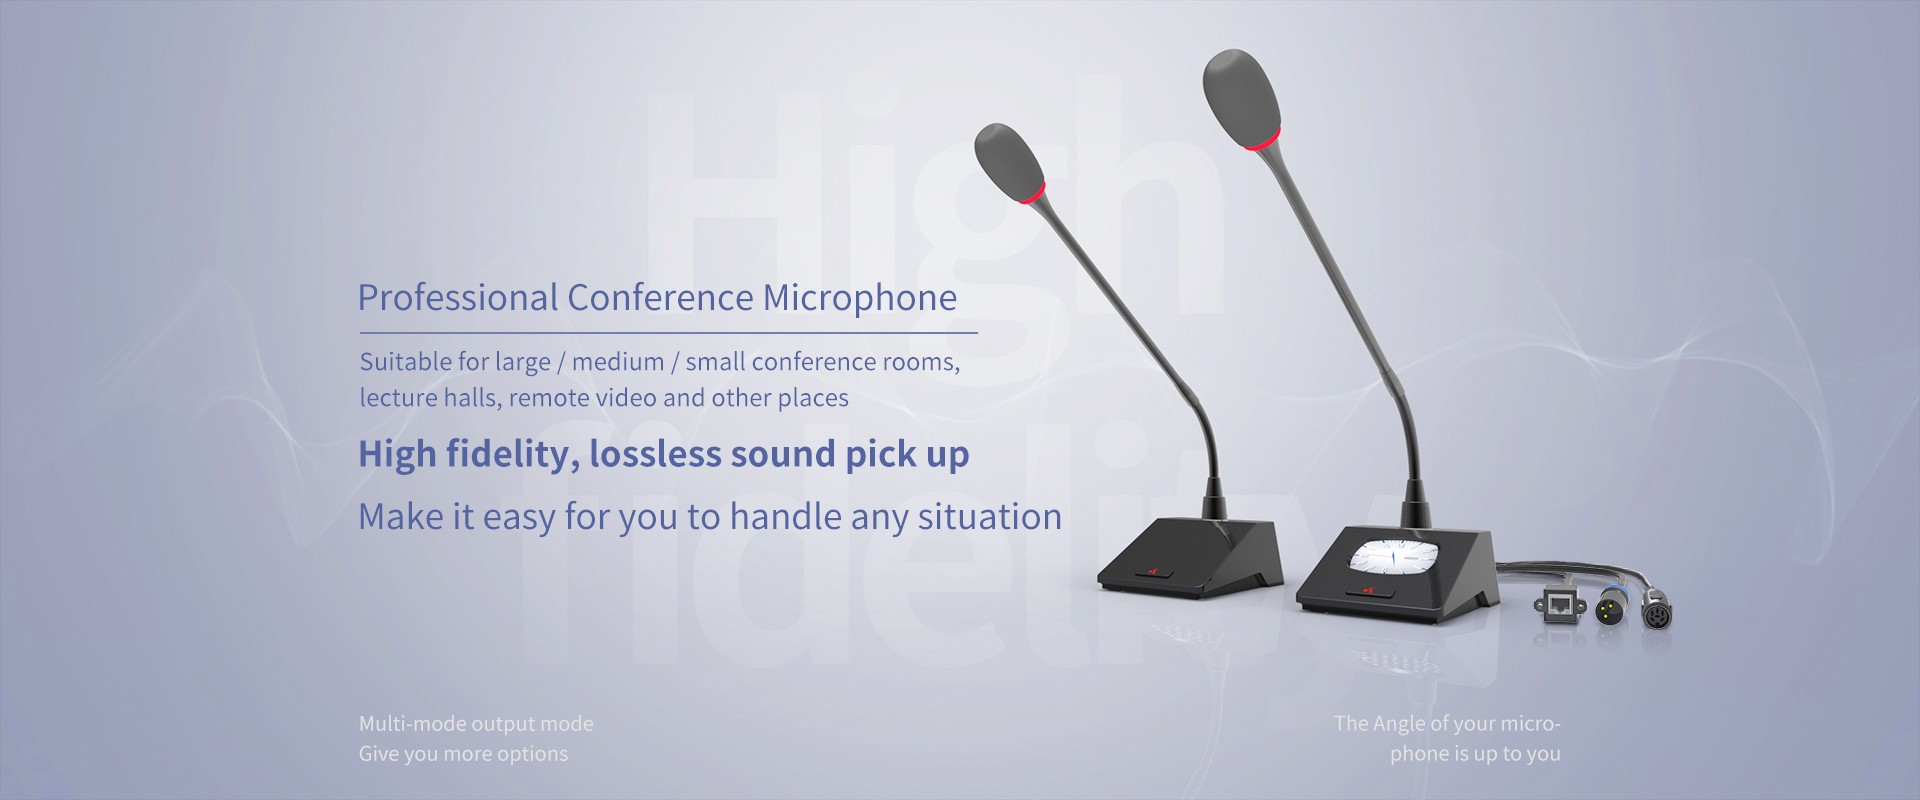 Professional Conference Microphone